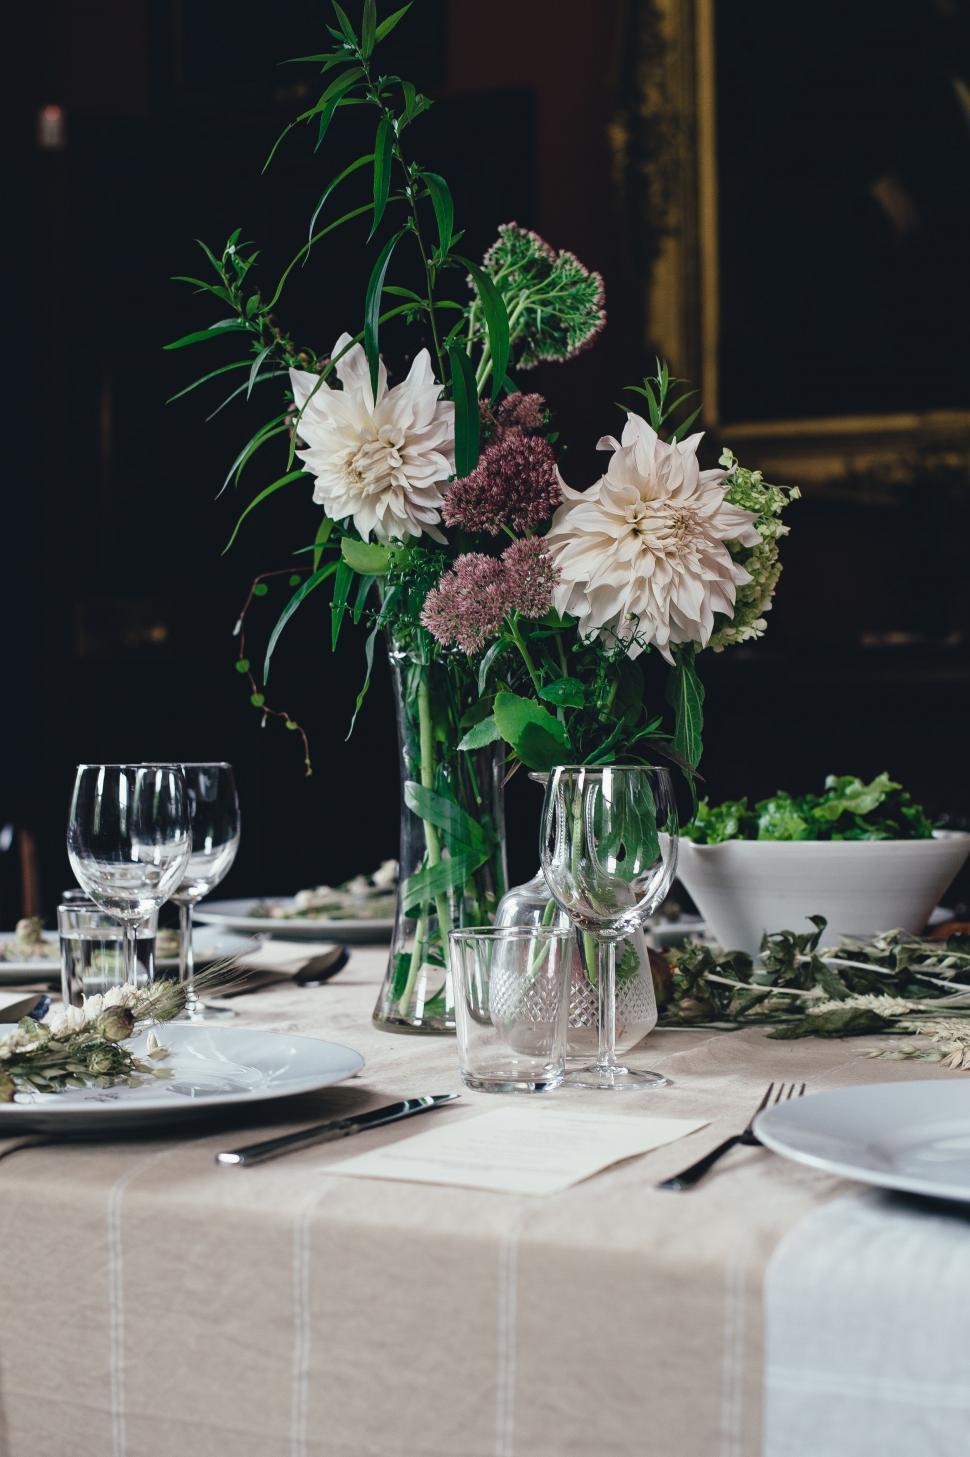 Free Image of Table With Vase of Flowers 